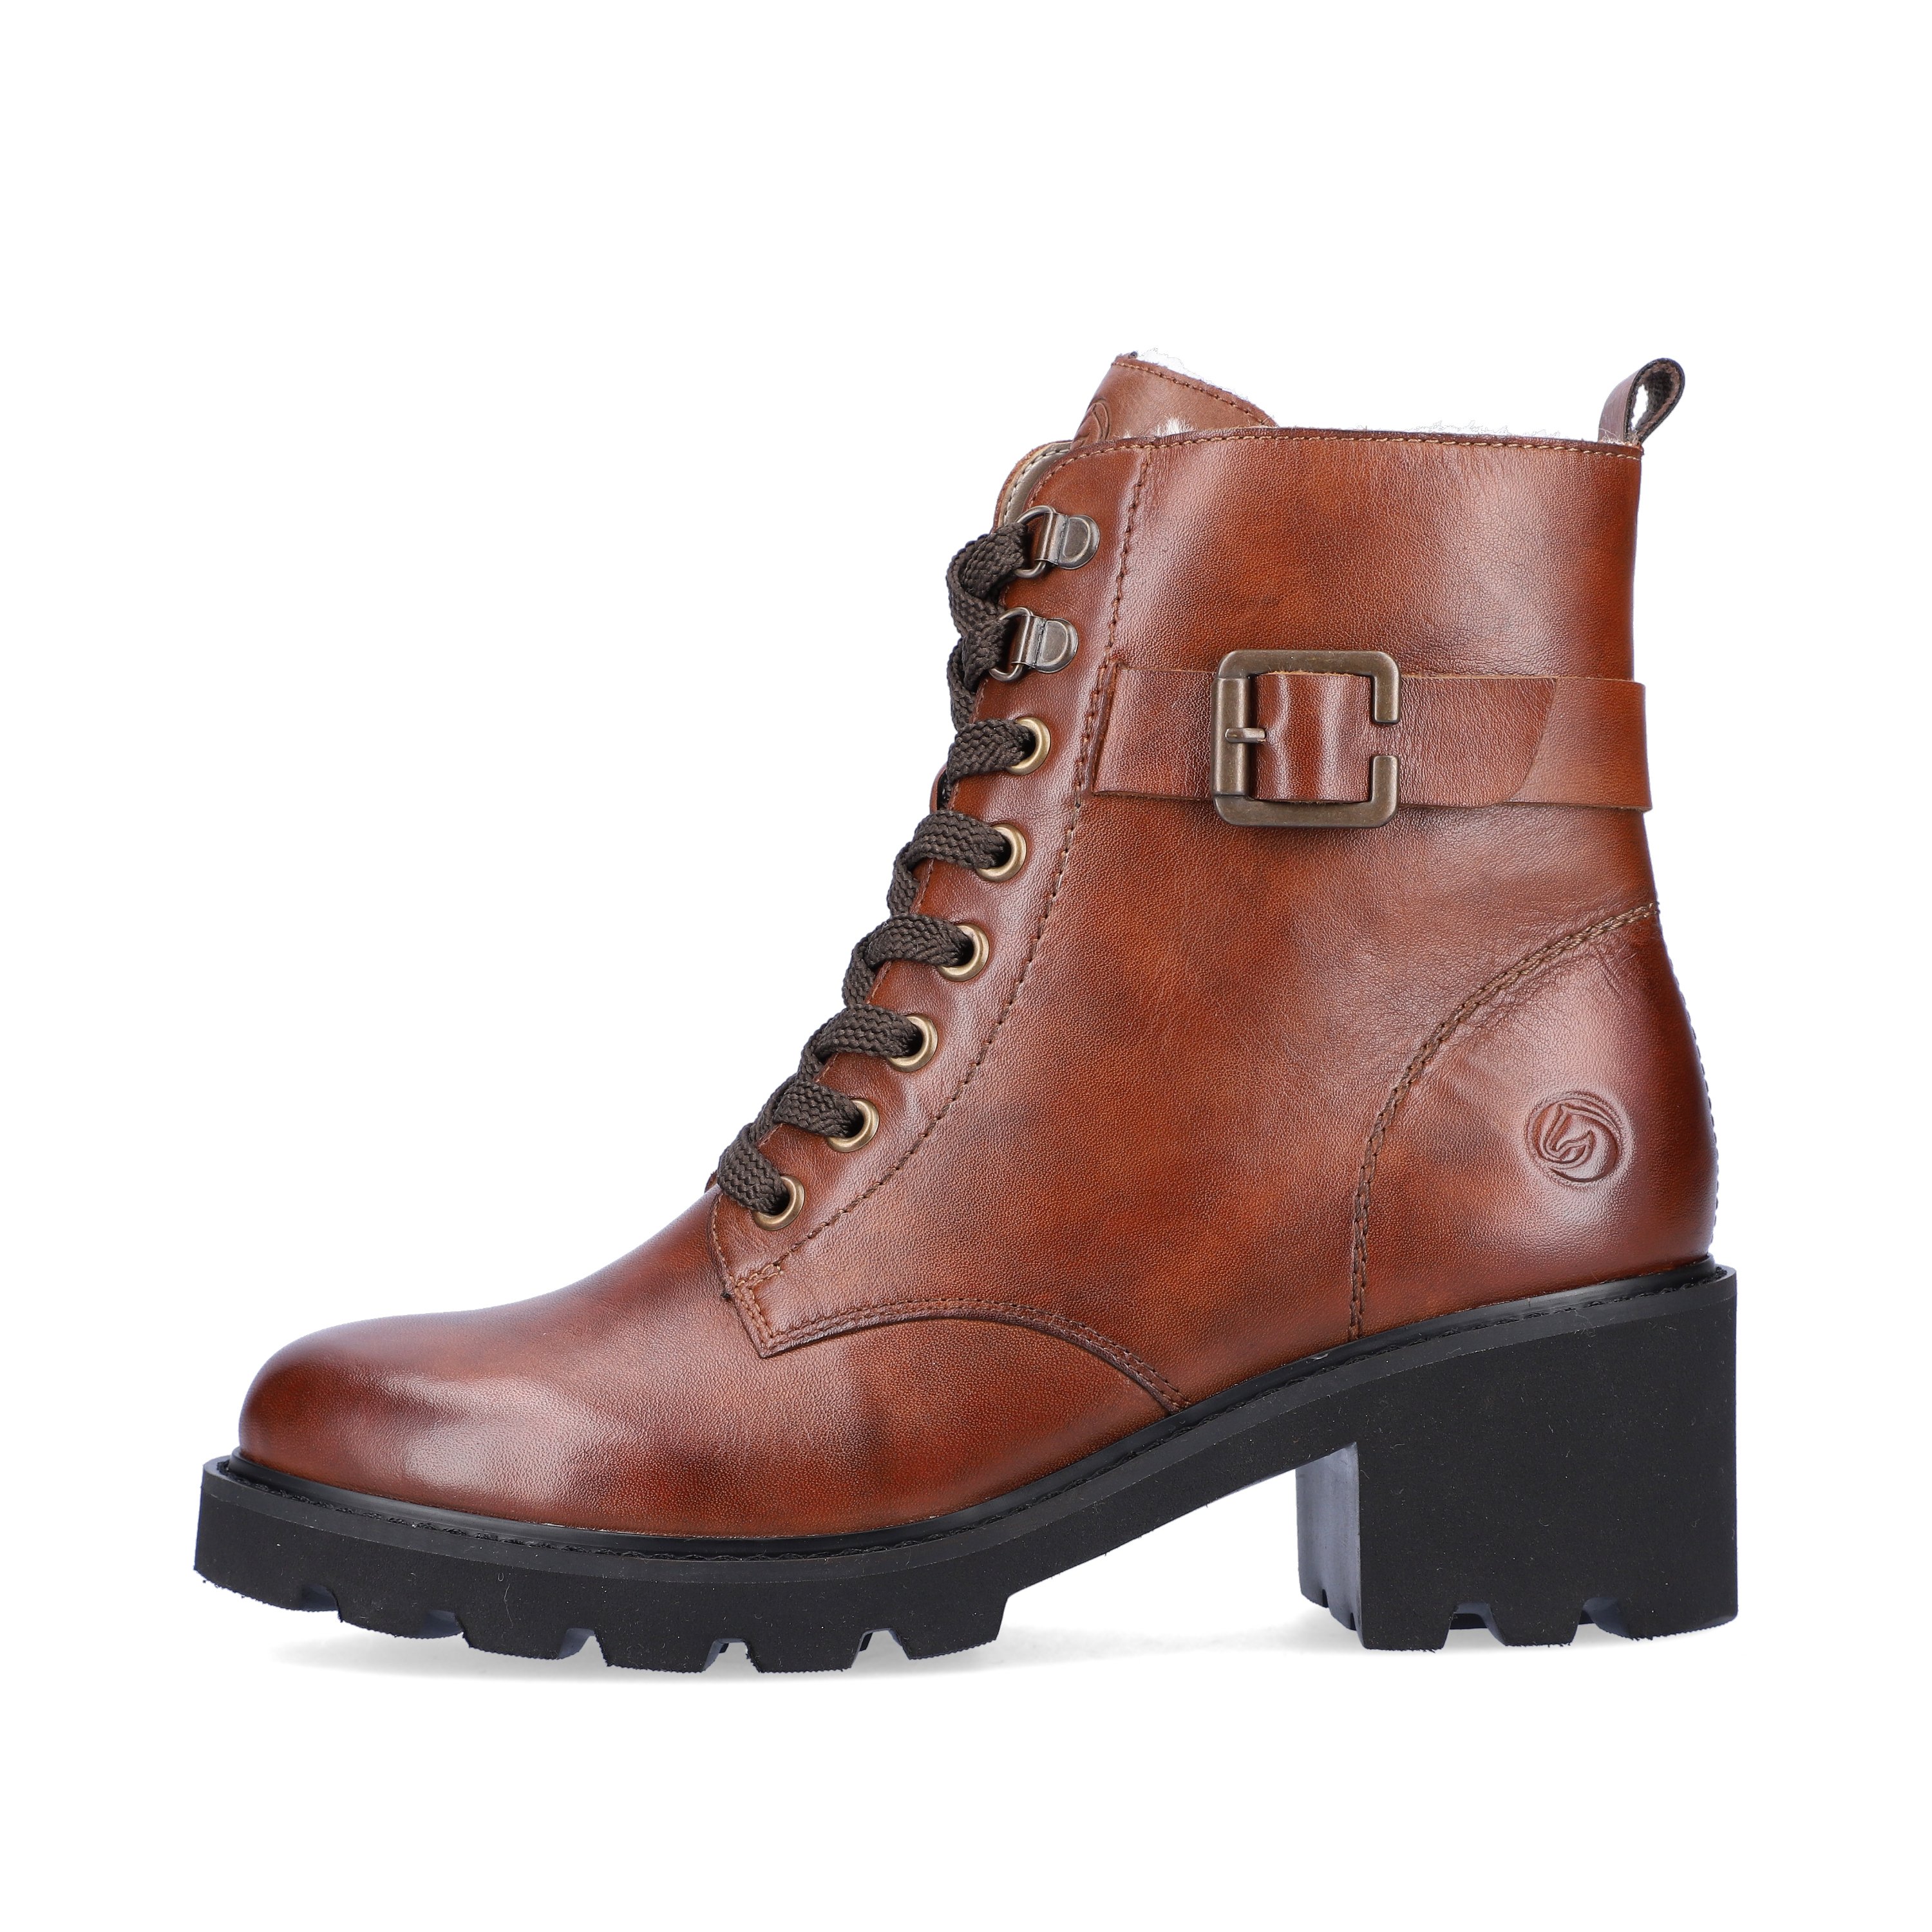 Hazel remonte women´s biker boots D0A74-22 with cushioning sole with block heel. The outside of the shoe